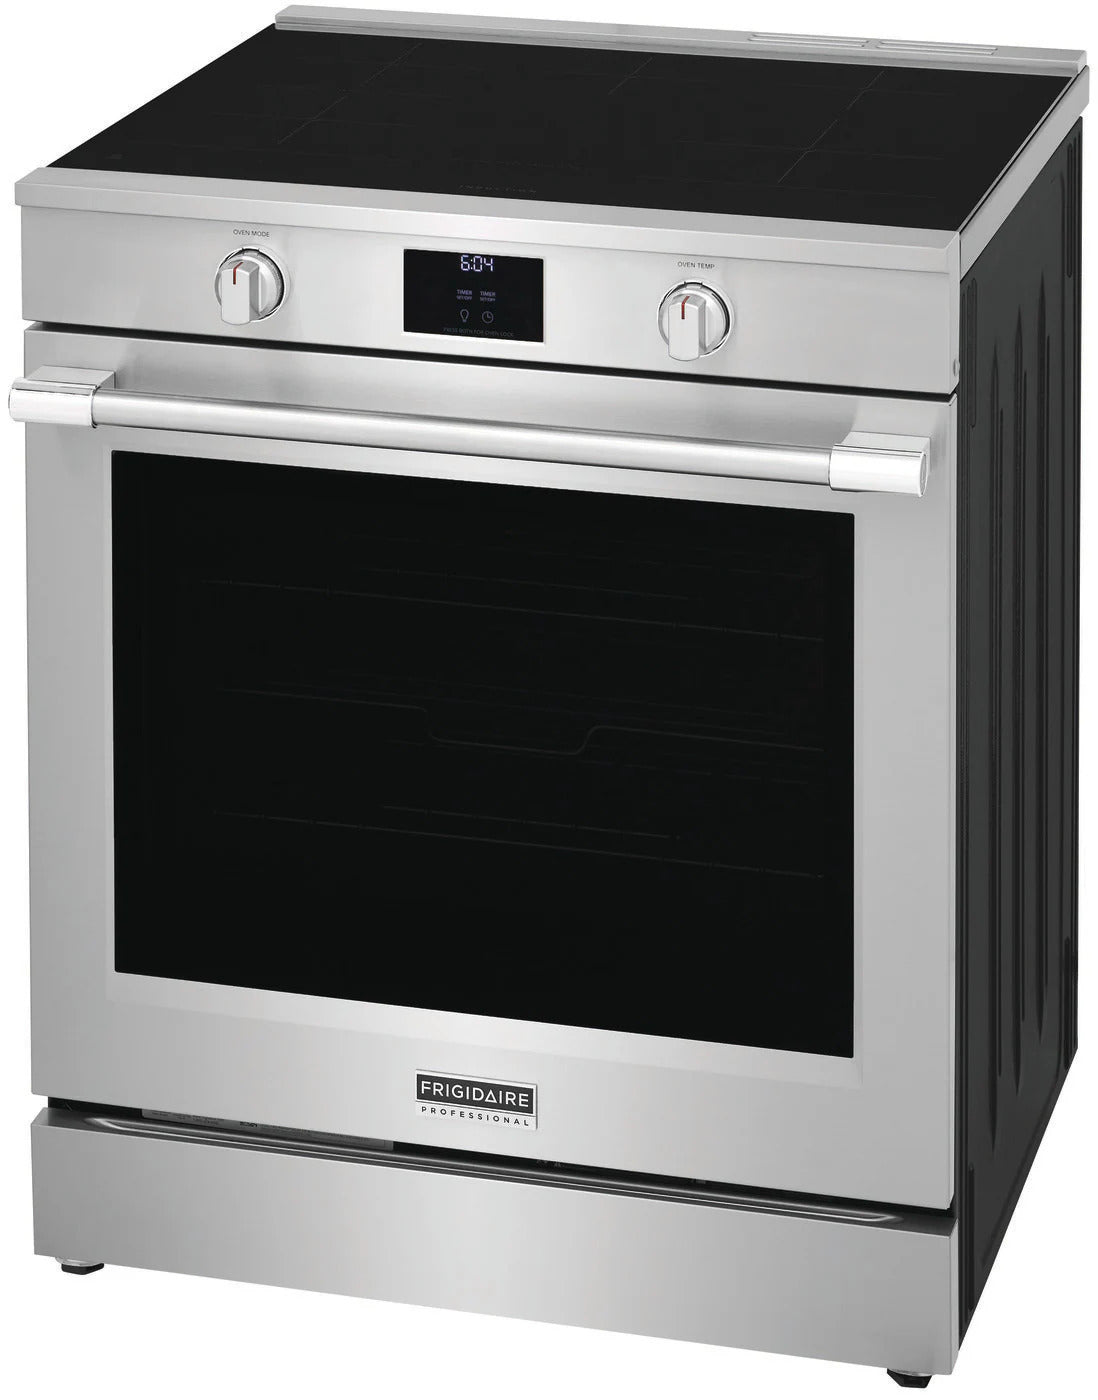 Frigidaire Professional - 6.2 cu. ft Induction Range in Stainless - PCFI308CAF